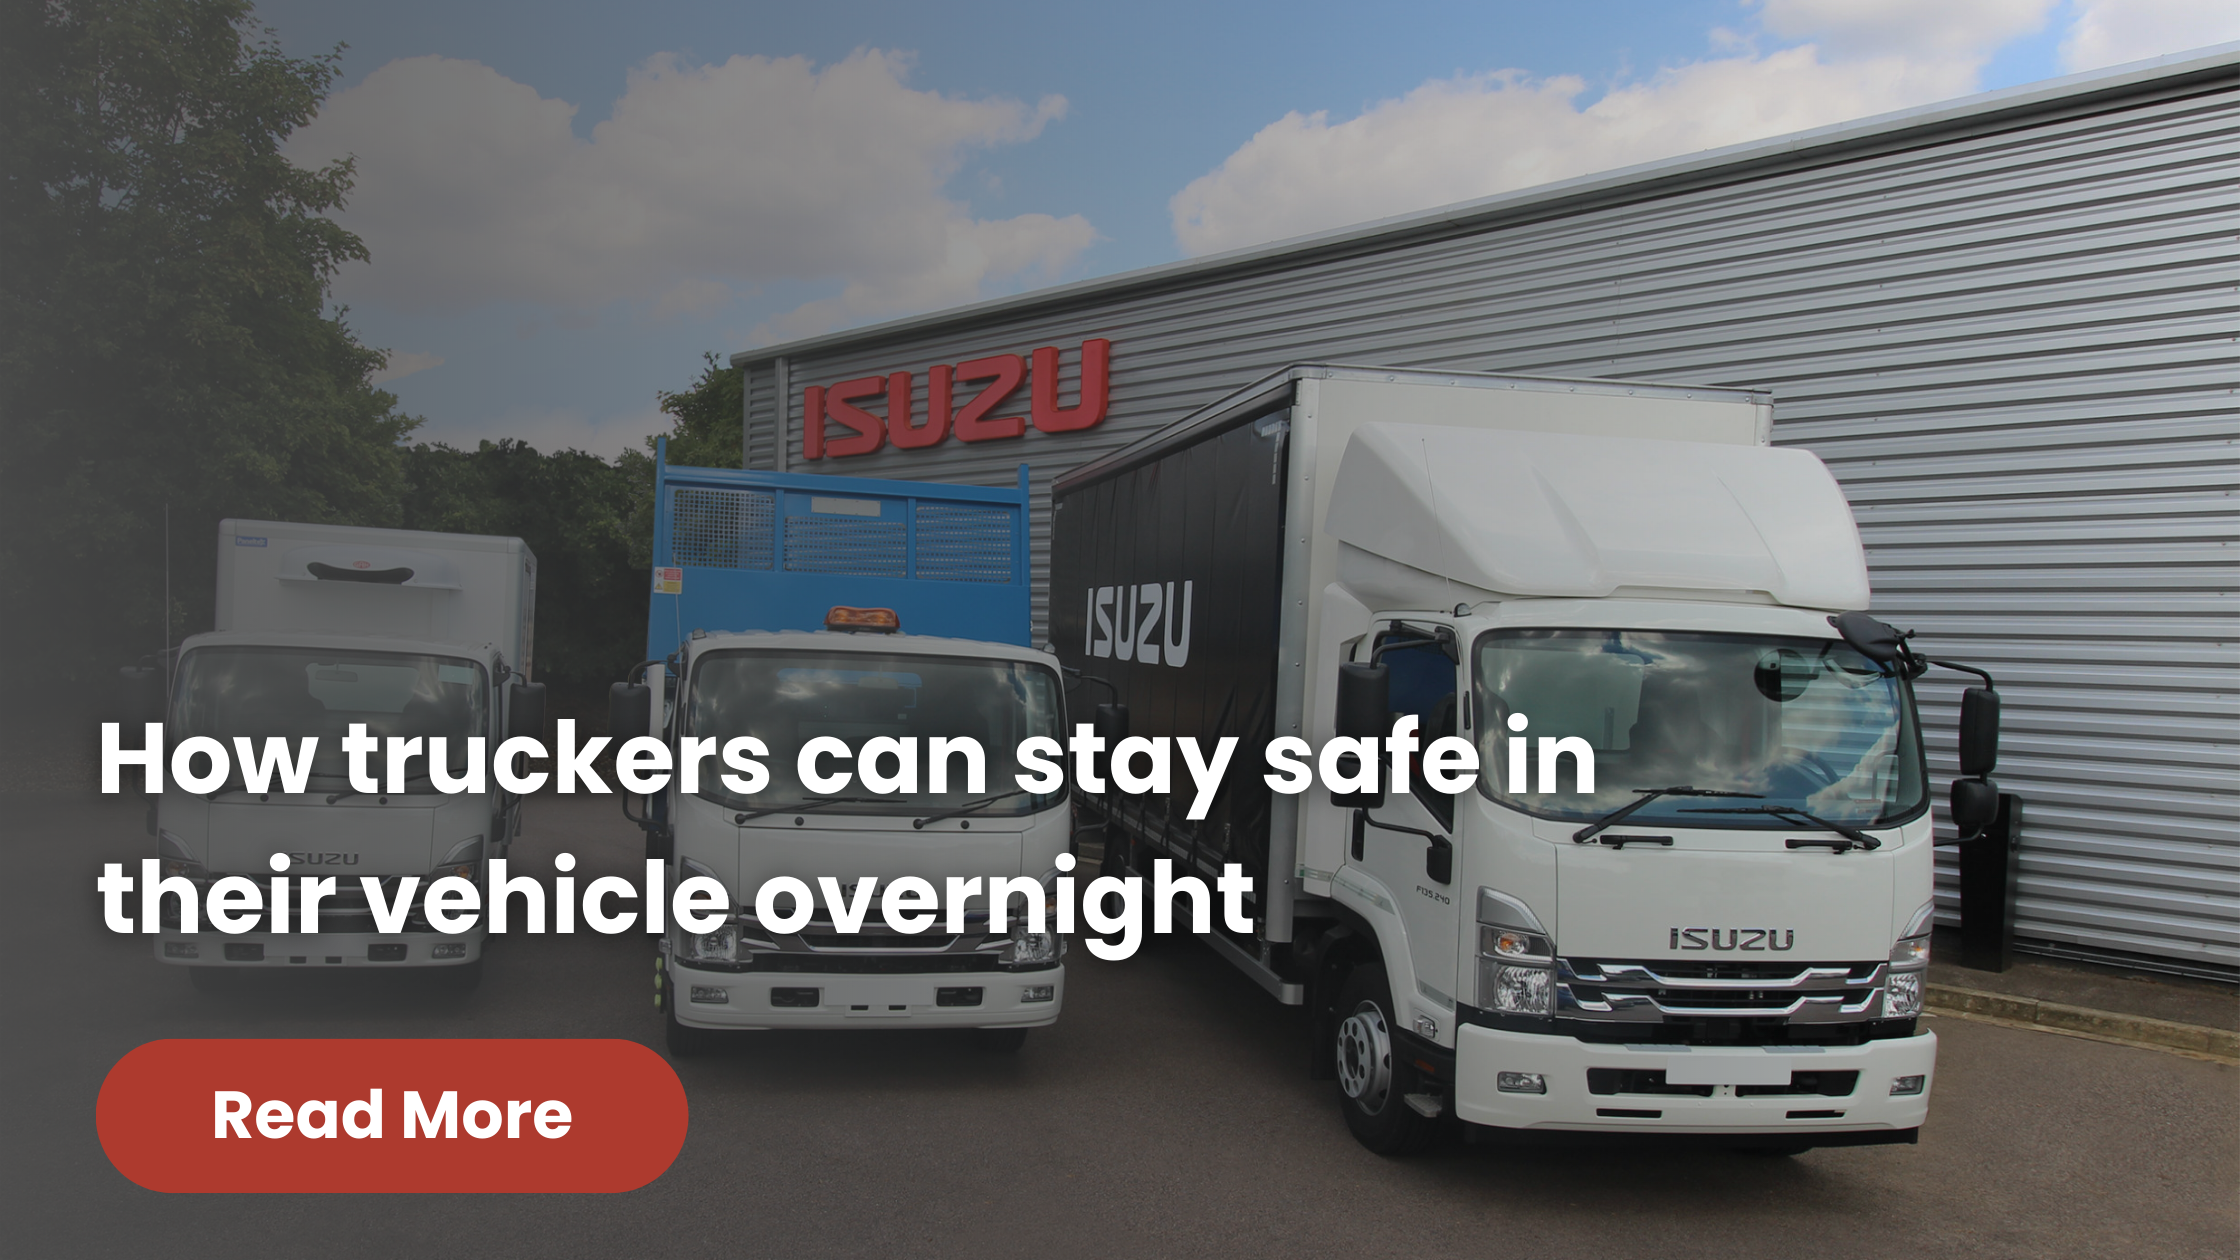 How Truckers Can Stay Safe Sleeping in Their Vehicle